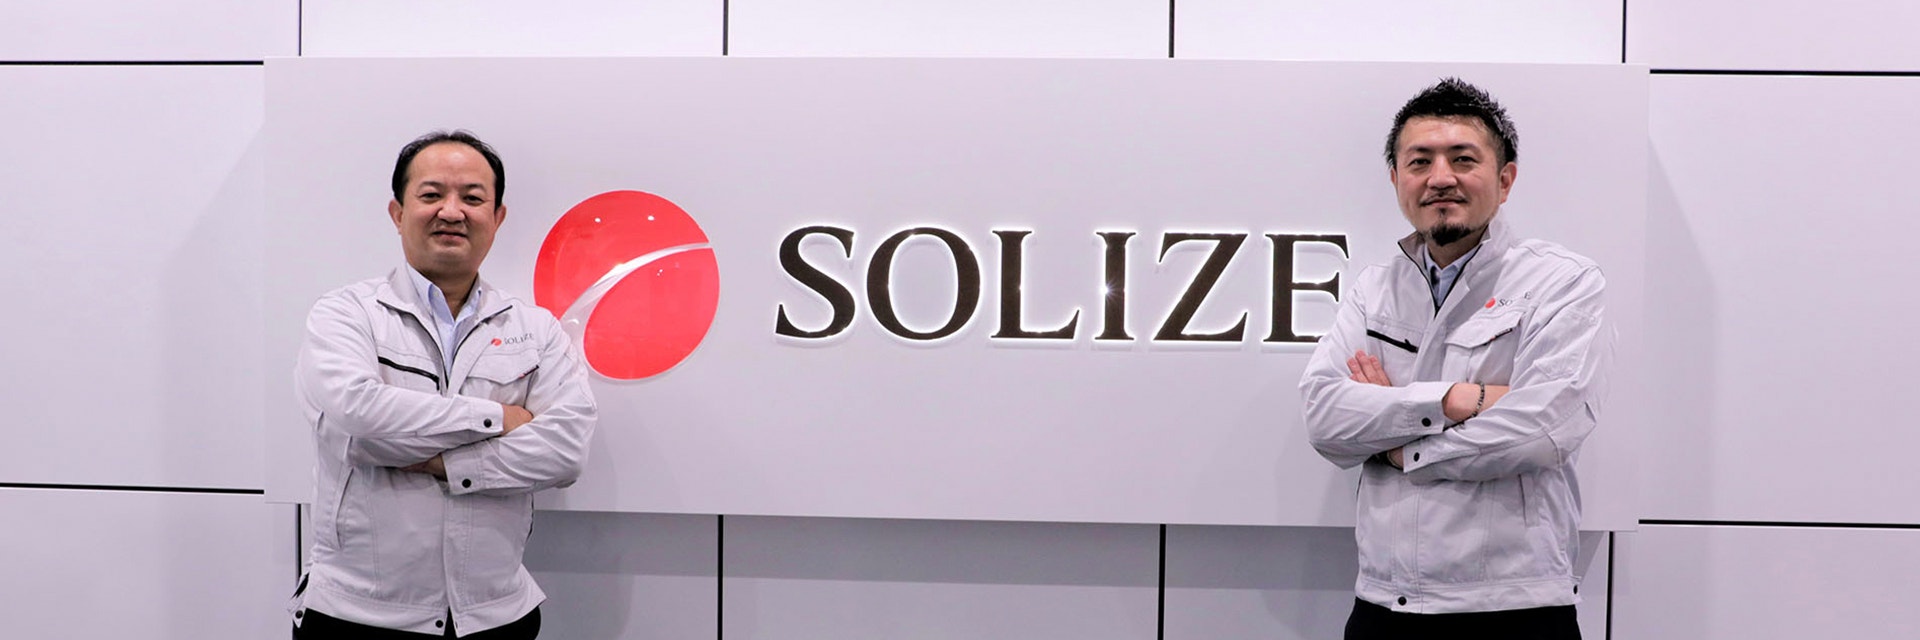 Two SOLIZE team members standing next to a SOLIZE sign.